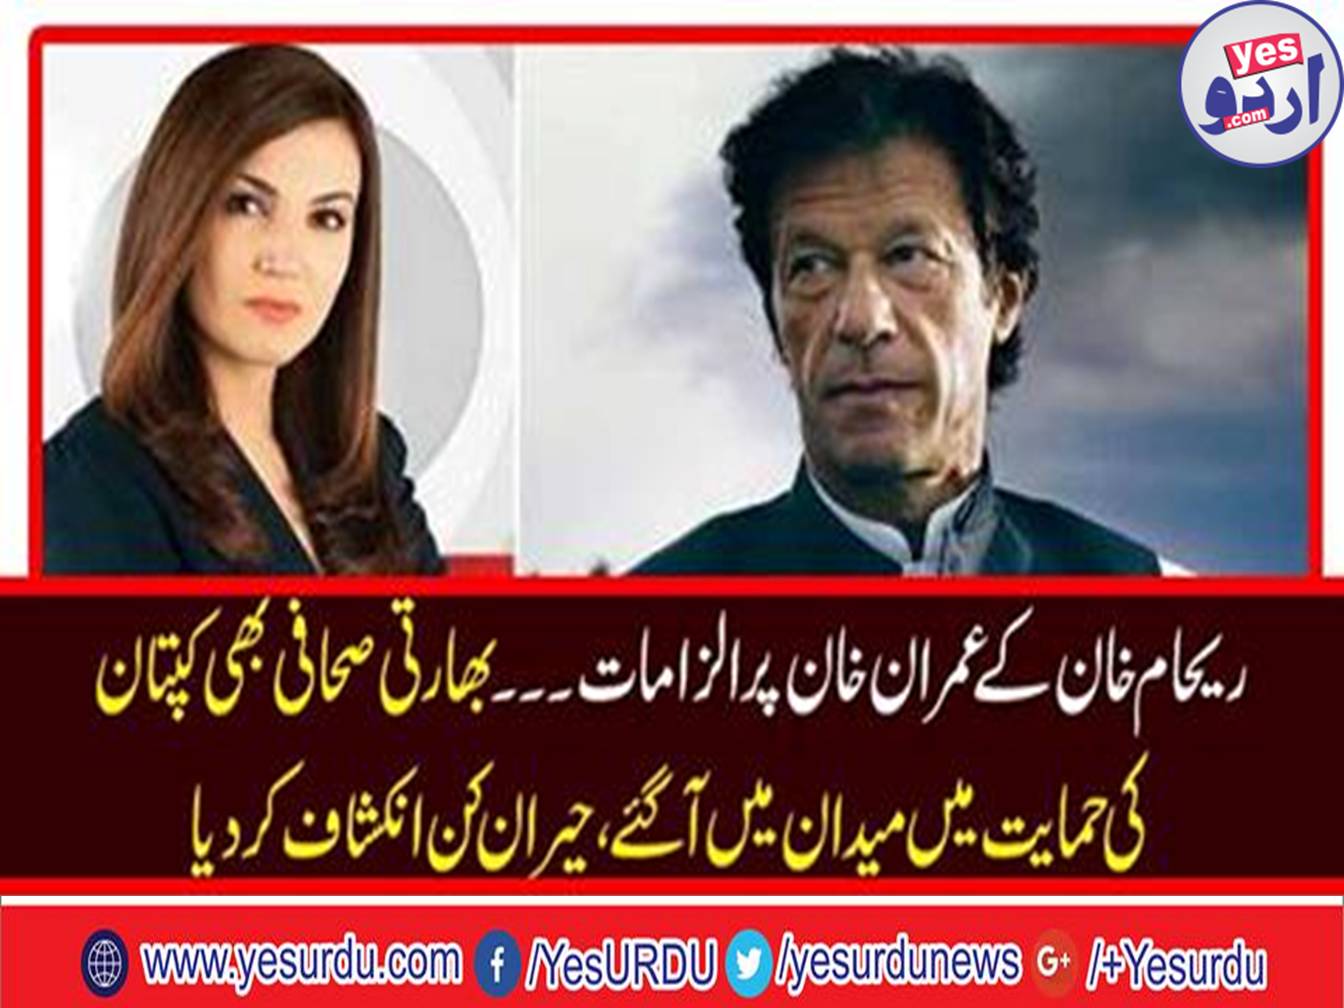 Indian Analyst Kishore Bhimani also came in defending Imran Khan